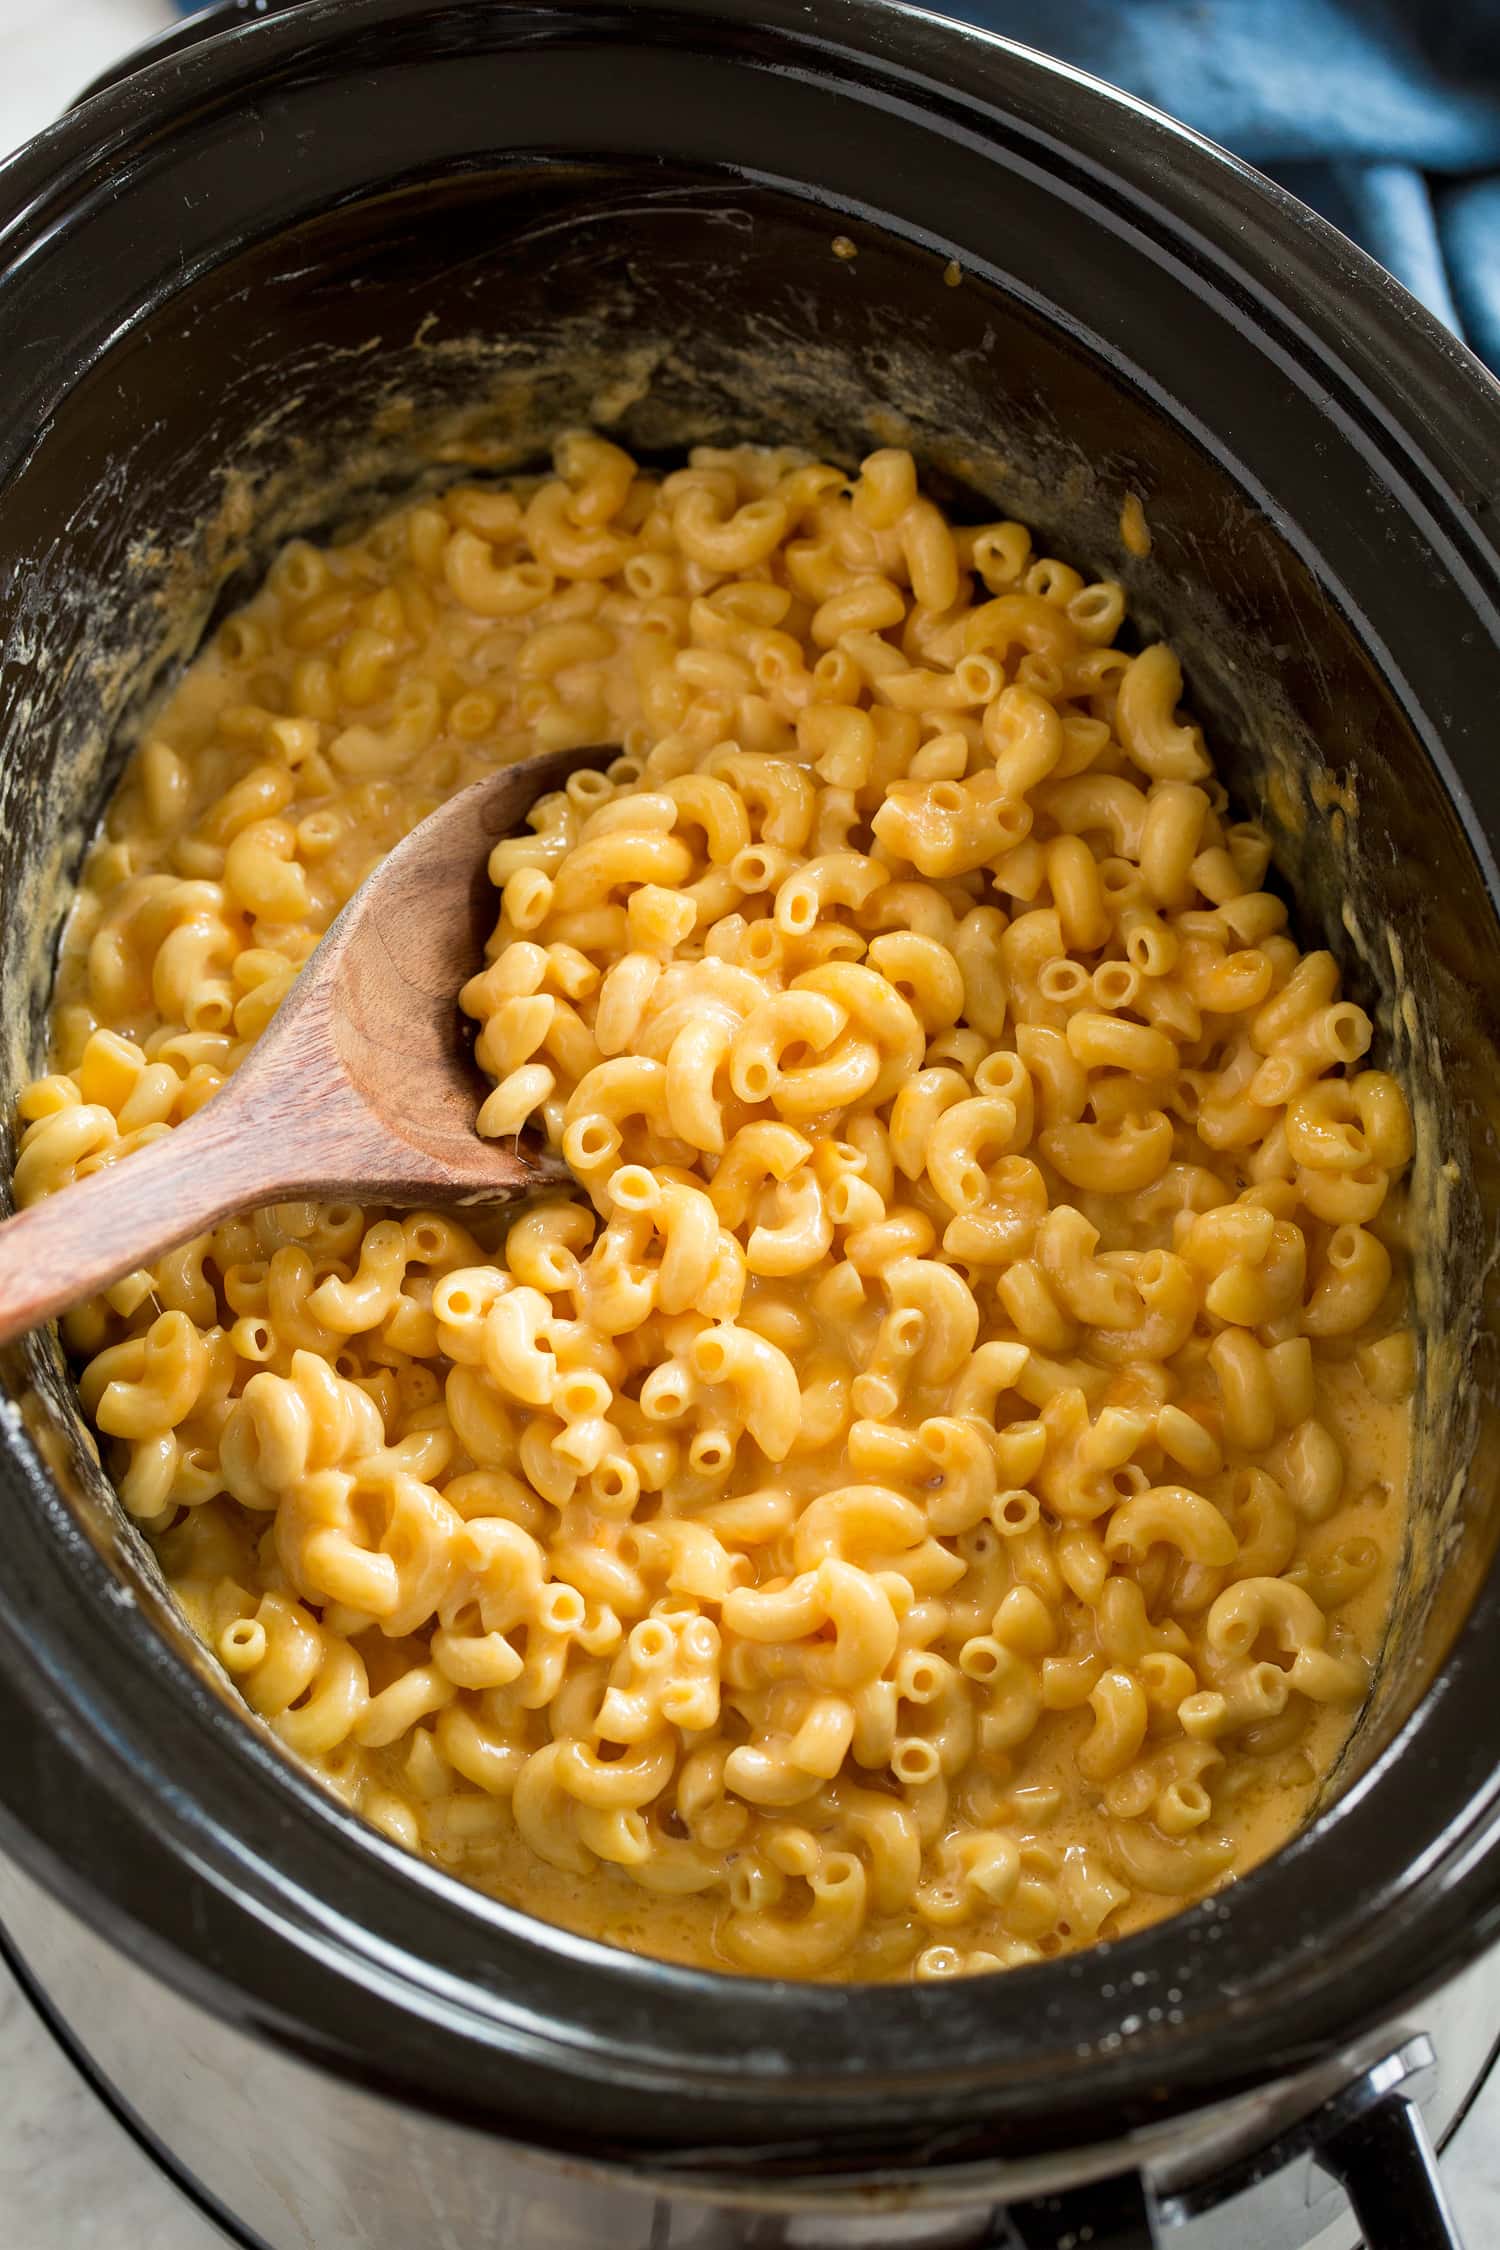 Crockpot Mac and Cheese in a slow cooker with a wooden spoon.